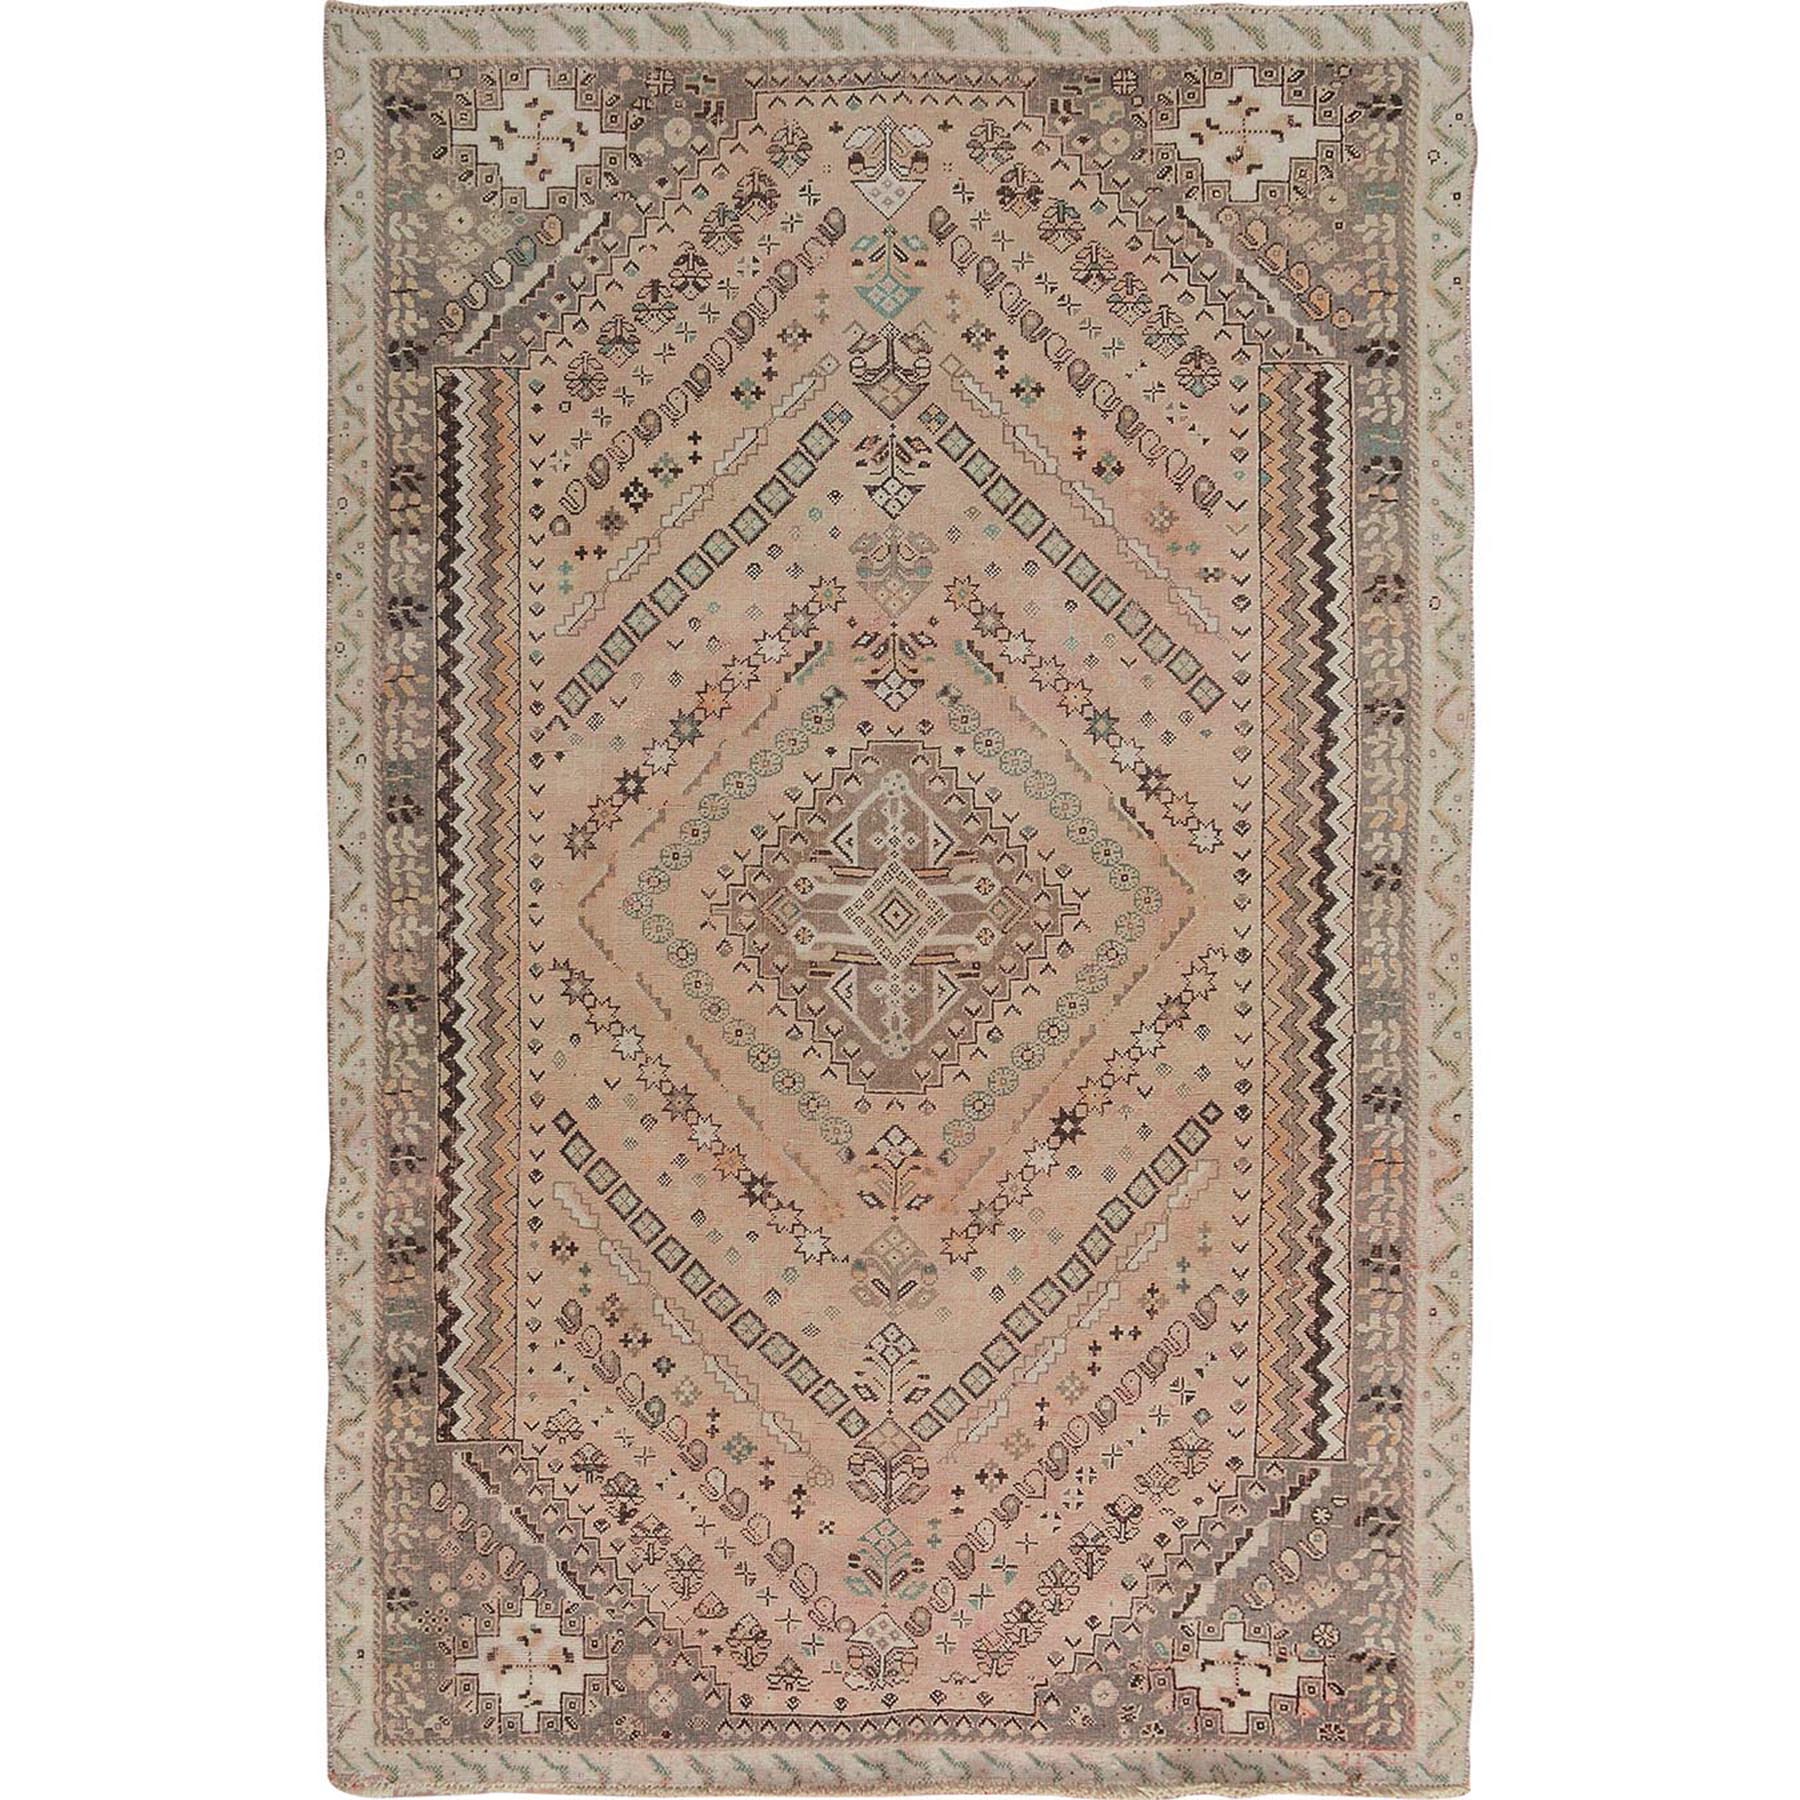 5-1 x7-10  Natural Colors Vintage And Worn Down Persian Shiraz Hand Knotted Oriental Rug 